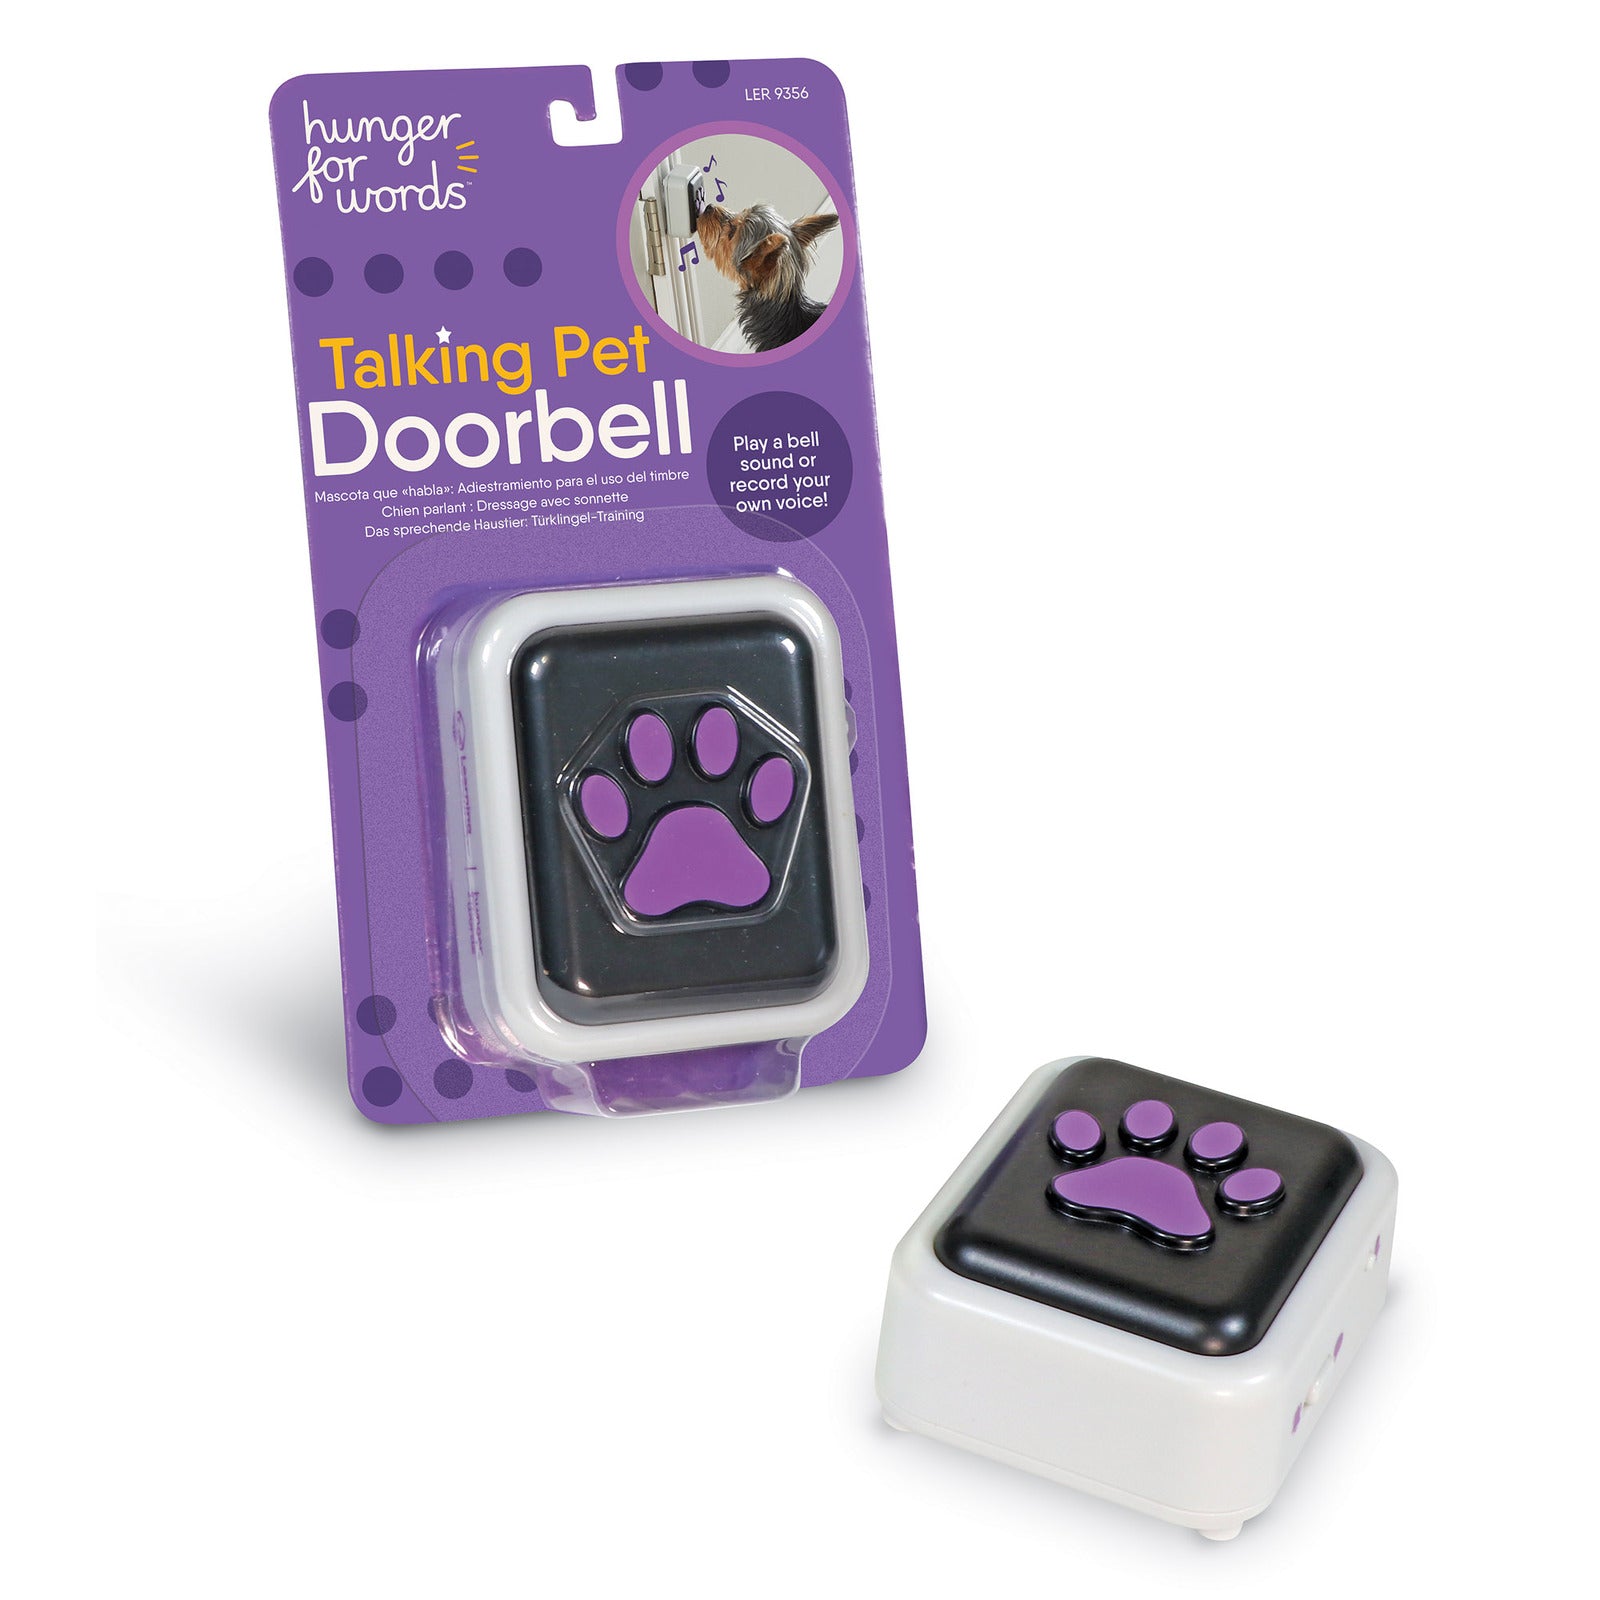 Flipside Talking Pet Doorbell with pre-recorded bell sounds